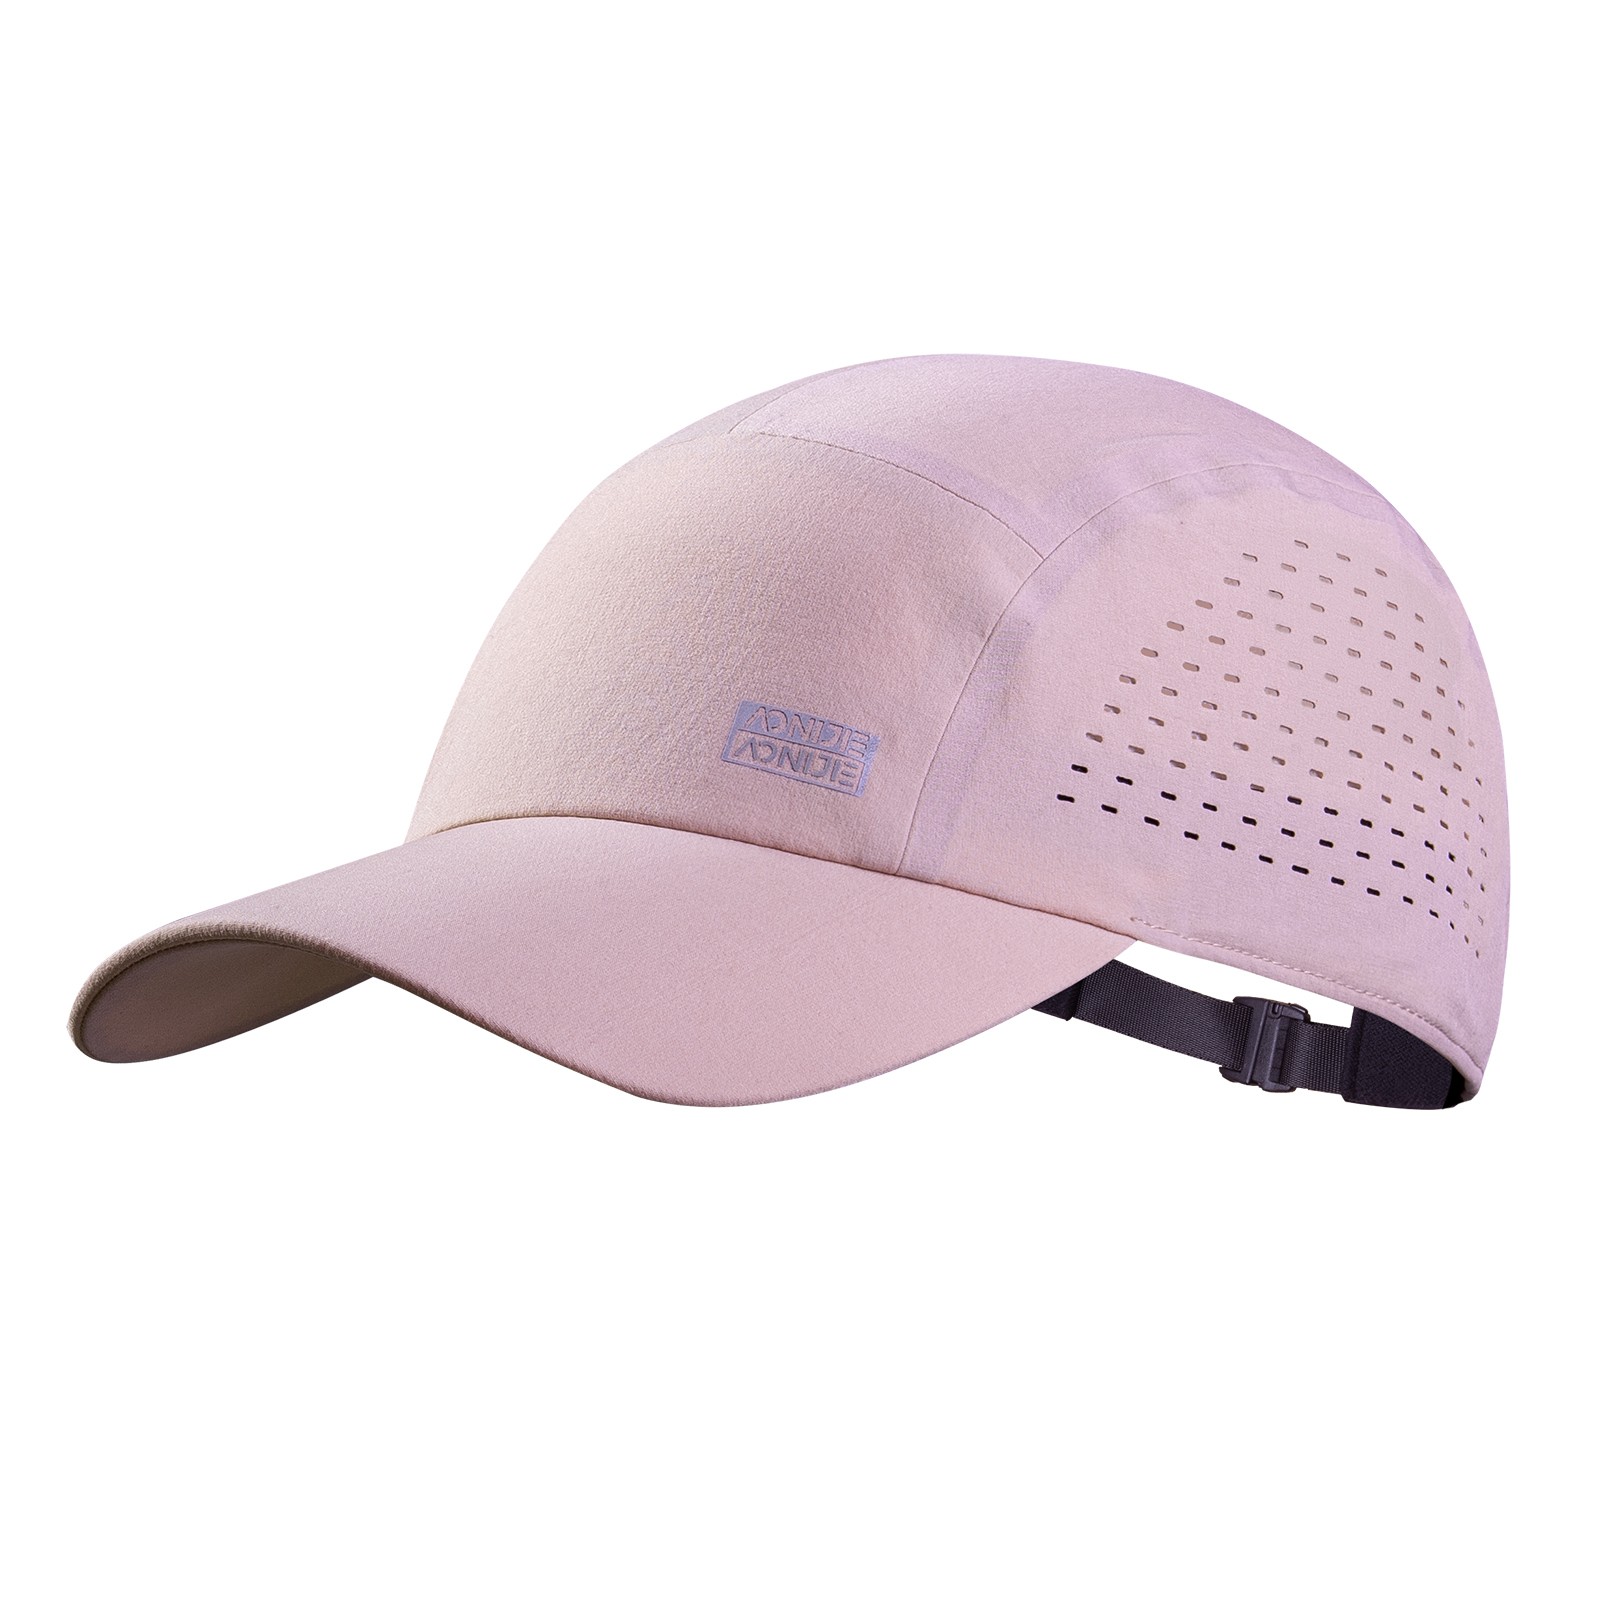 AONIJIE E4608 Sports Running Baseball Sunhat Outdoor Quick-drying Summer Visor Protection Brim Sunscreen Hats for Hiking Cyling